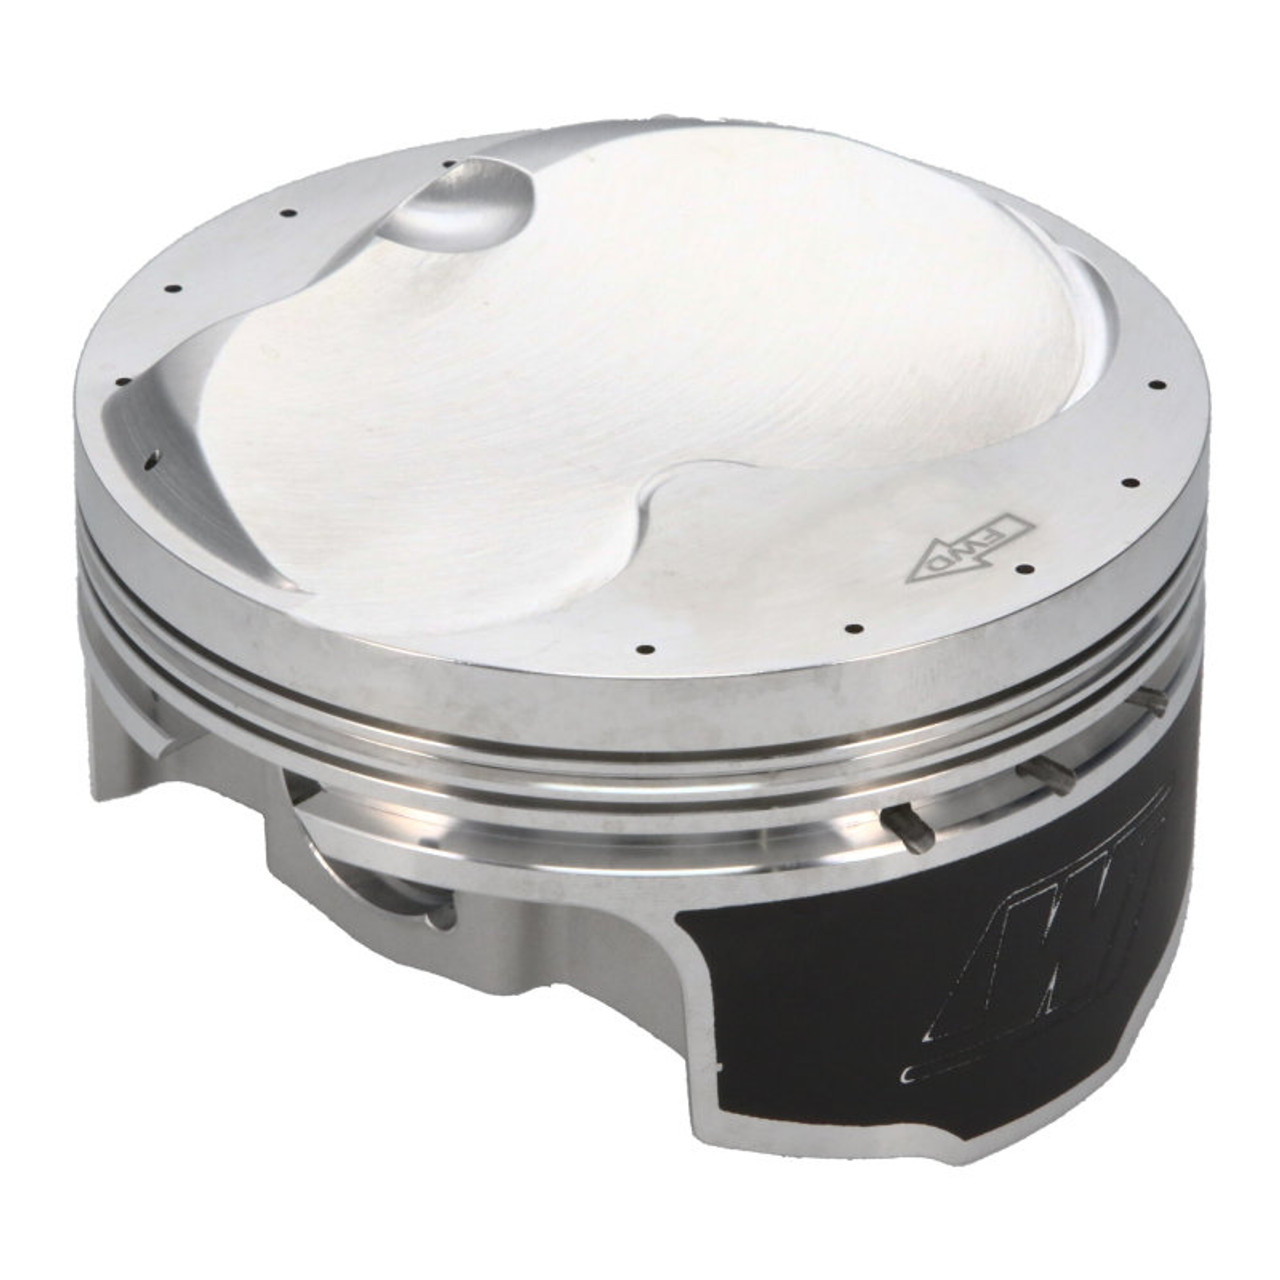 Wiseco Chevy LS Series Stroker Max Dome 1.110in CH 4.030in Bore Piston Kit - K0433B3 Photo - Primary